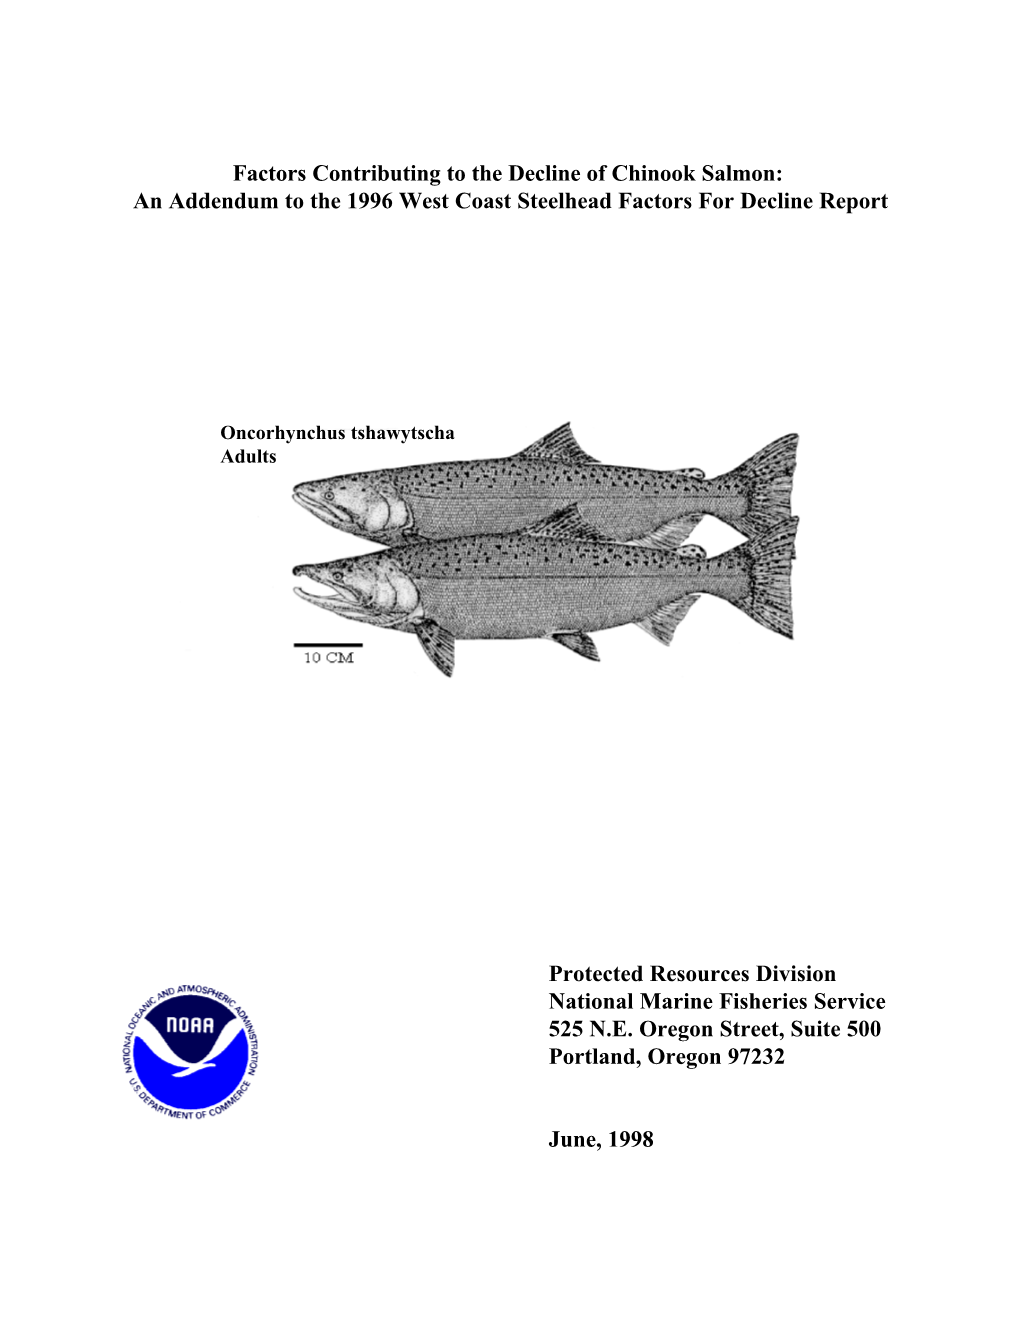 Factors Contributing to the Decline of Chinook Salmon: an Addendum to the 1996 West Coast Steelhead Factors for Decline Report